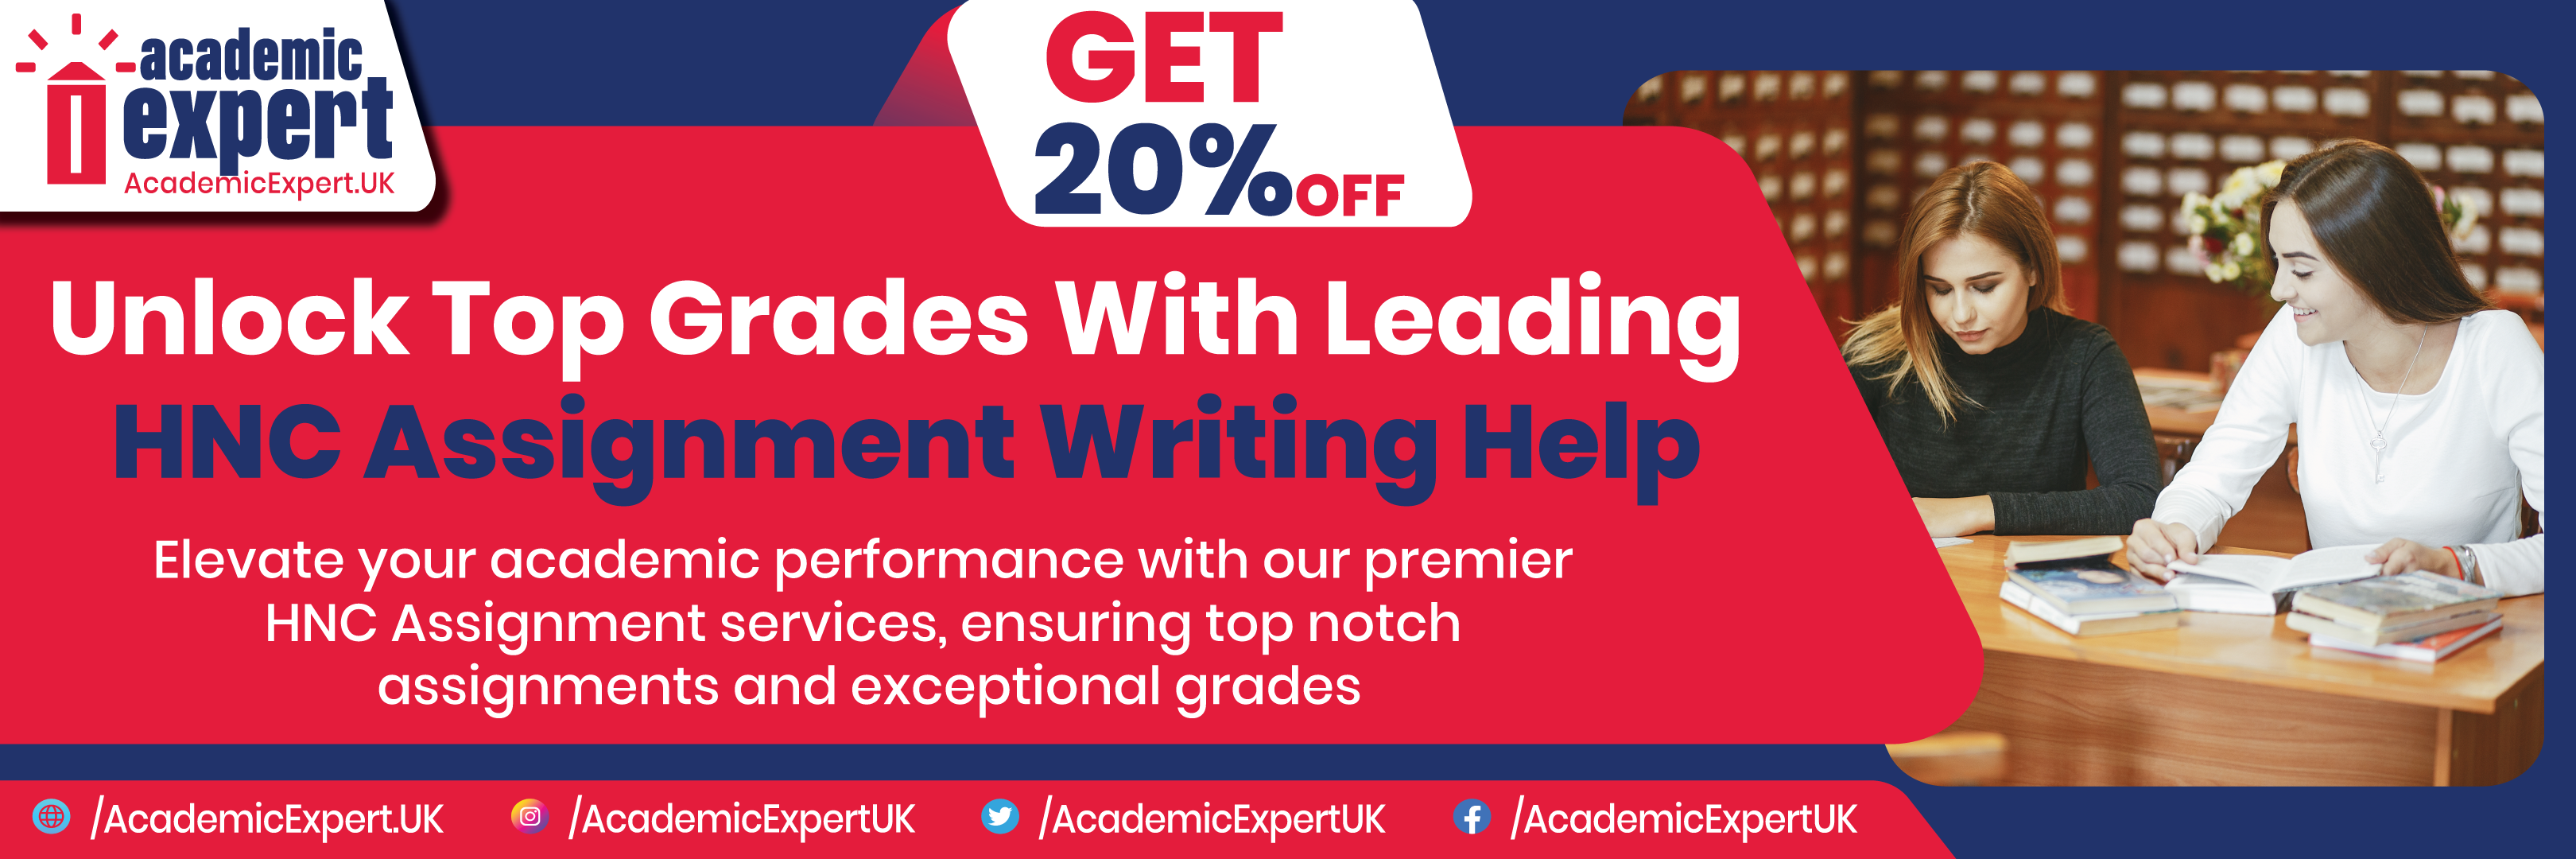 Unlock Top Grades With Leading HNC Assignment Writing Help